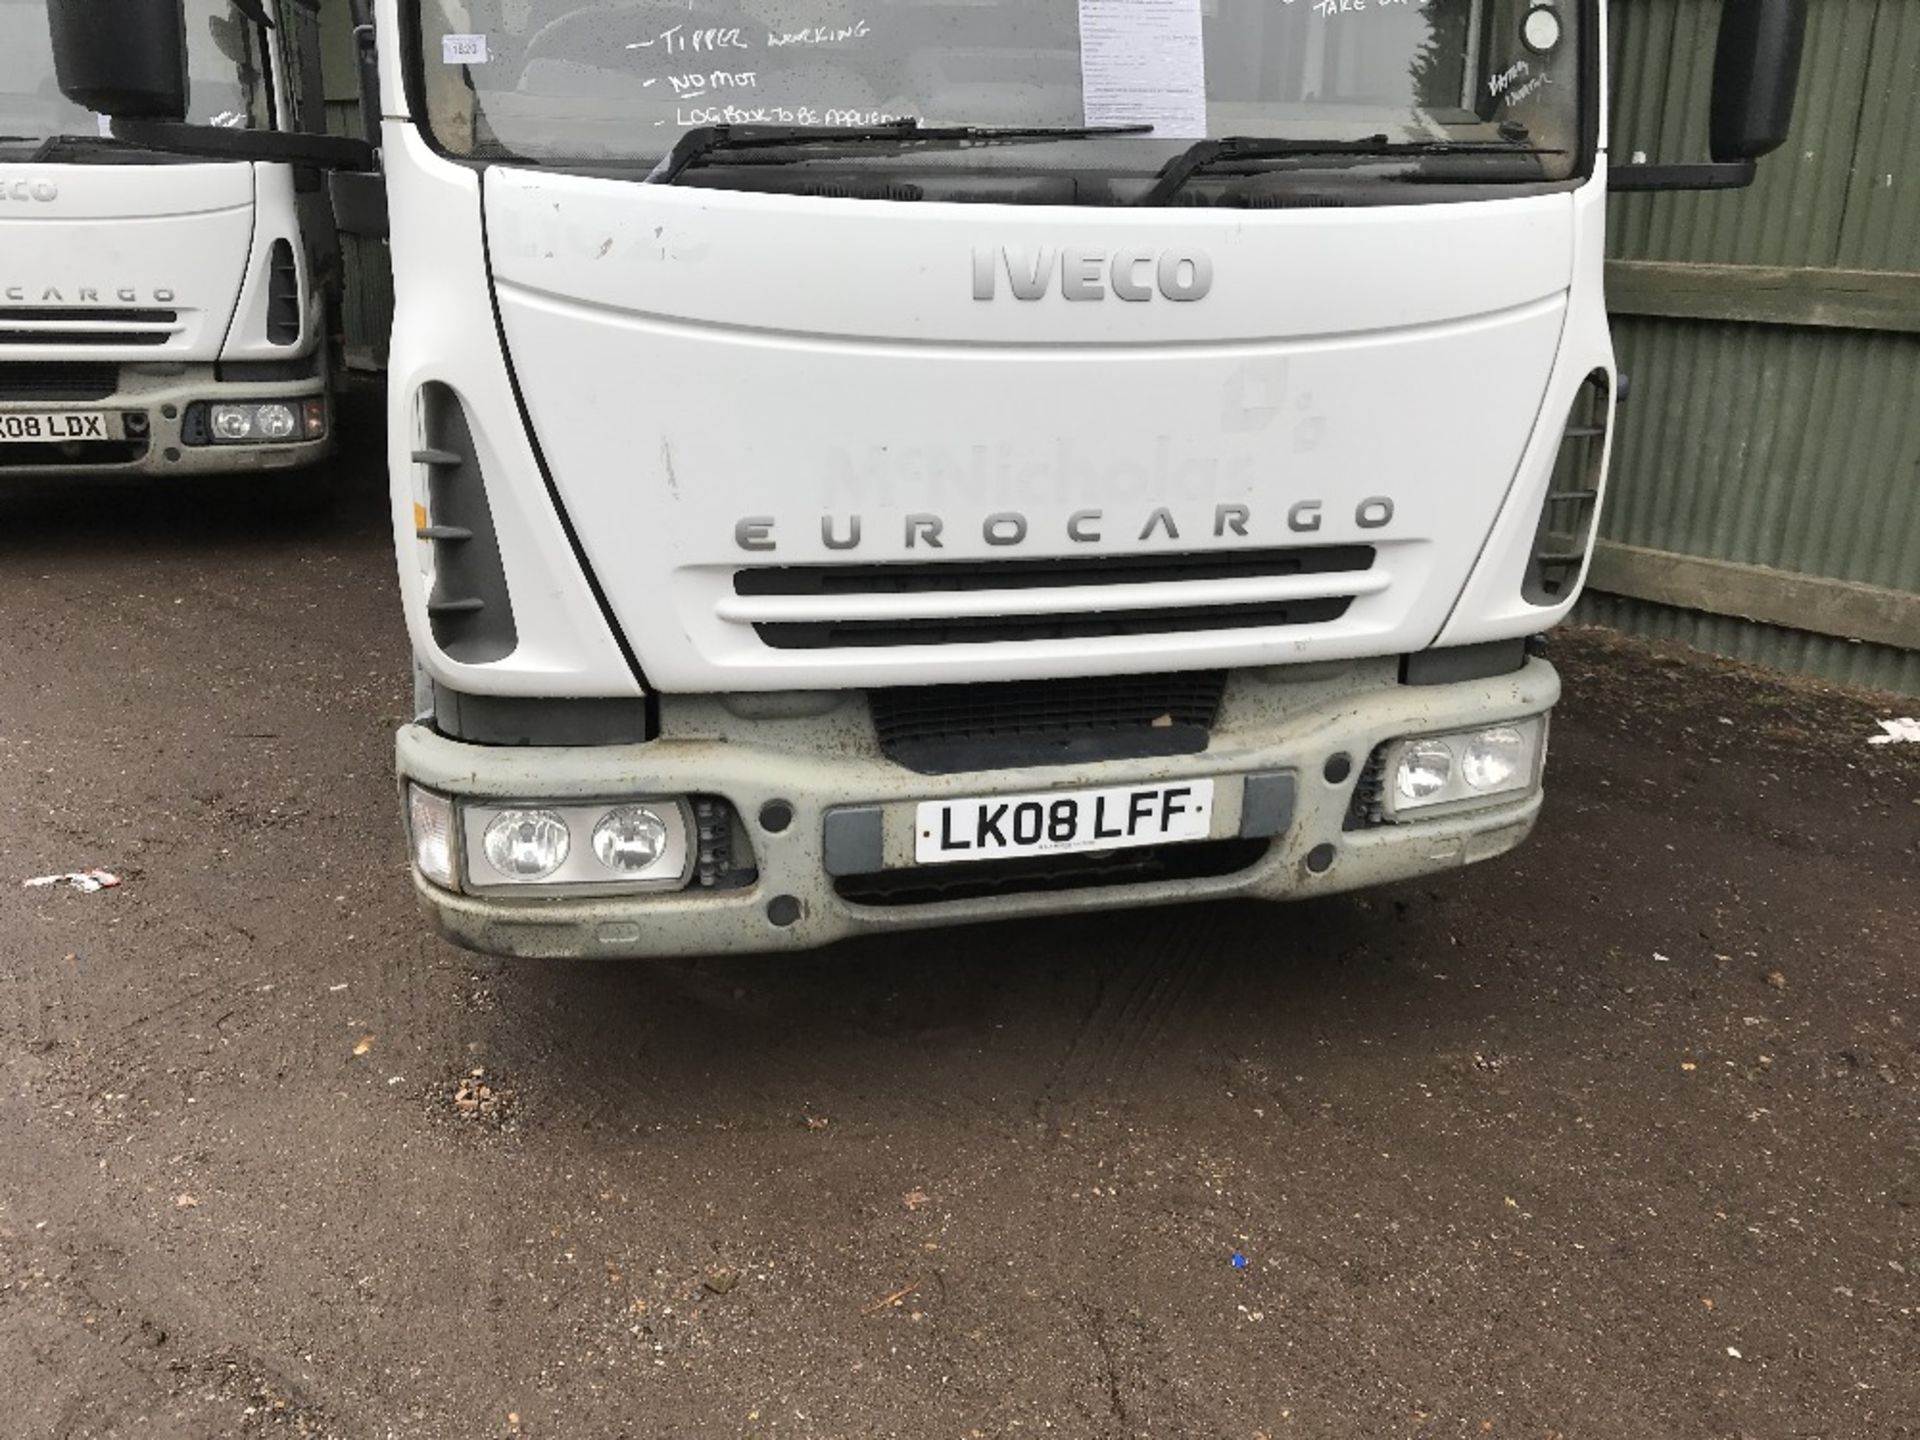 IVECO CARGO TIPPER IVECO EURO CARGO 7500KG RATED TIPPER, WHITE WITH GREY BODY. REG:LK08 LFF - Image 2 of 9